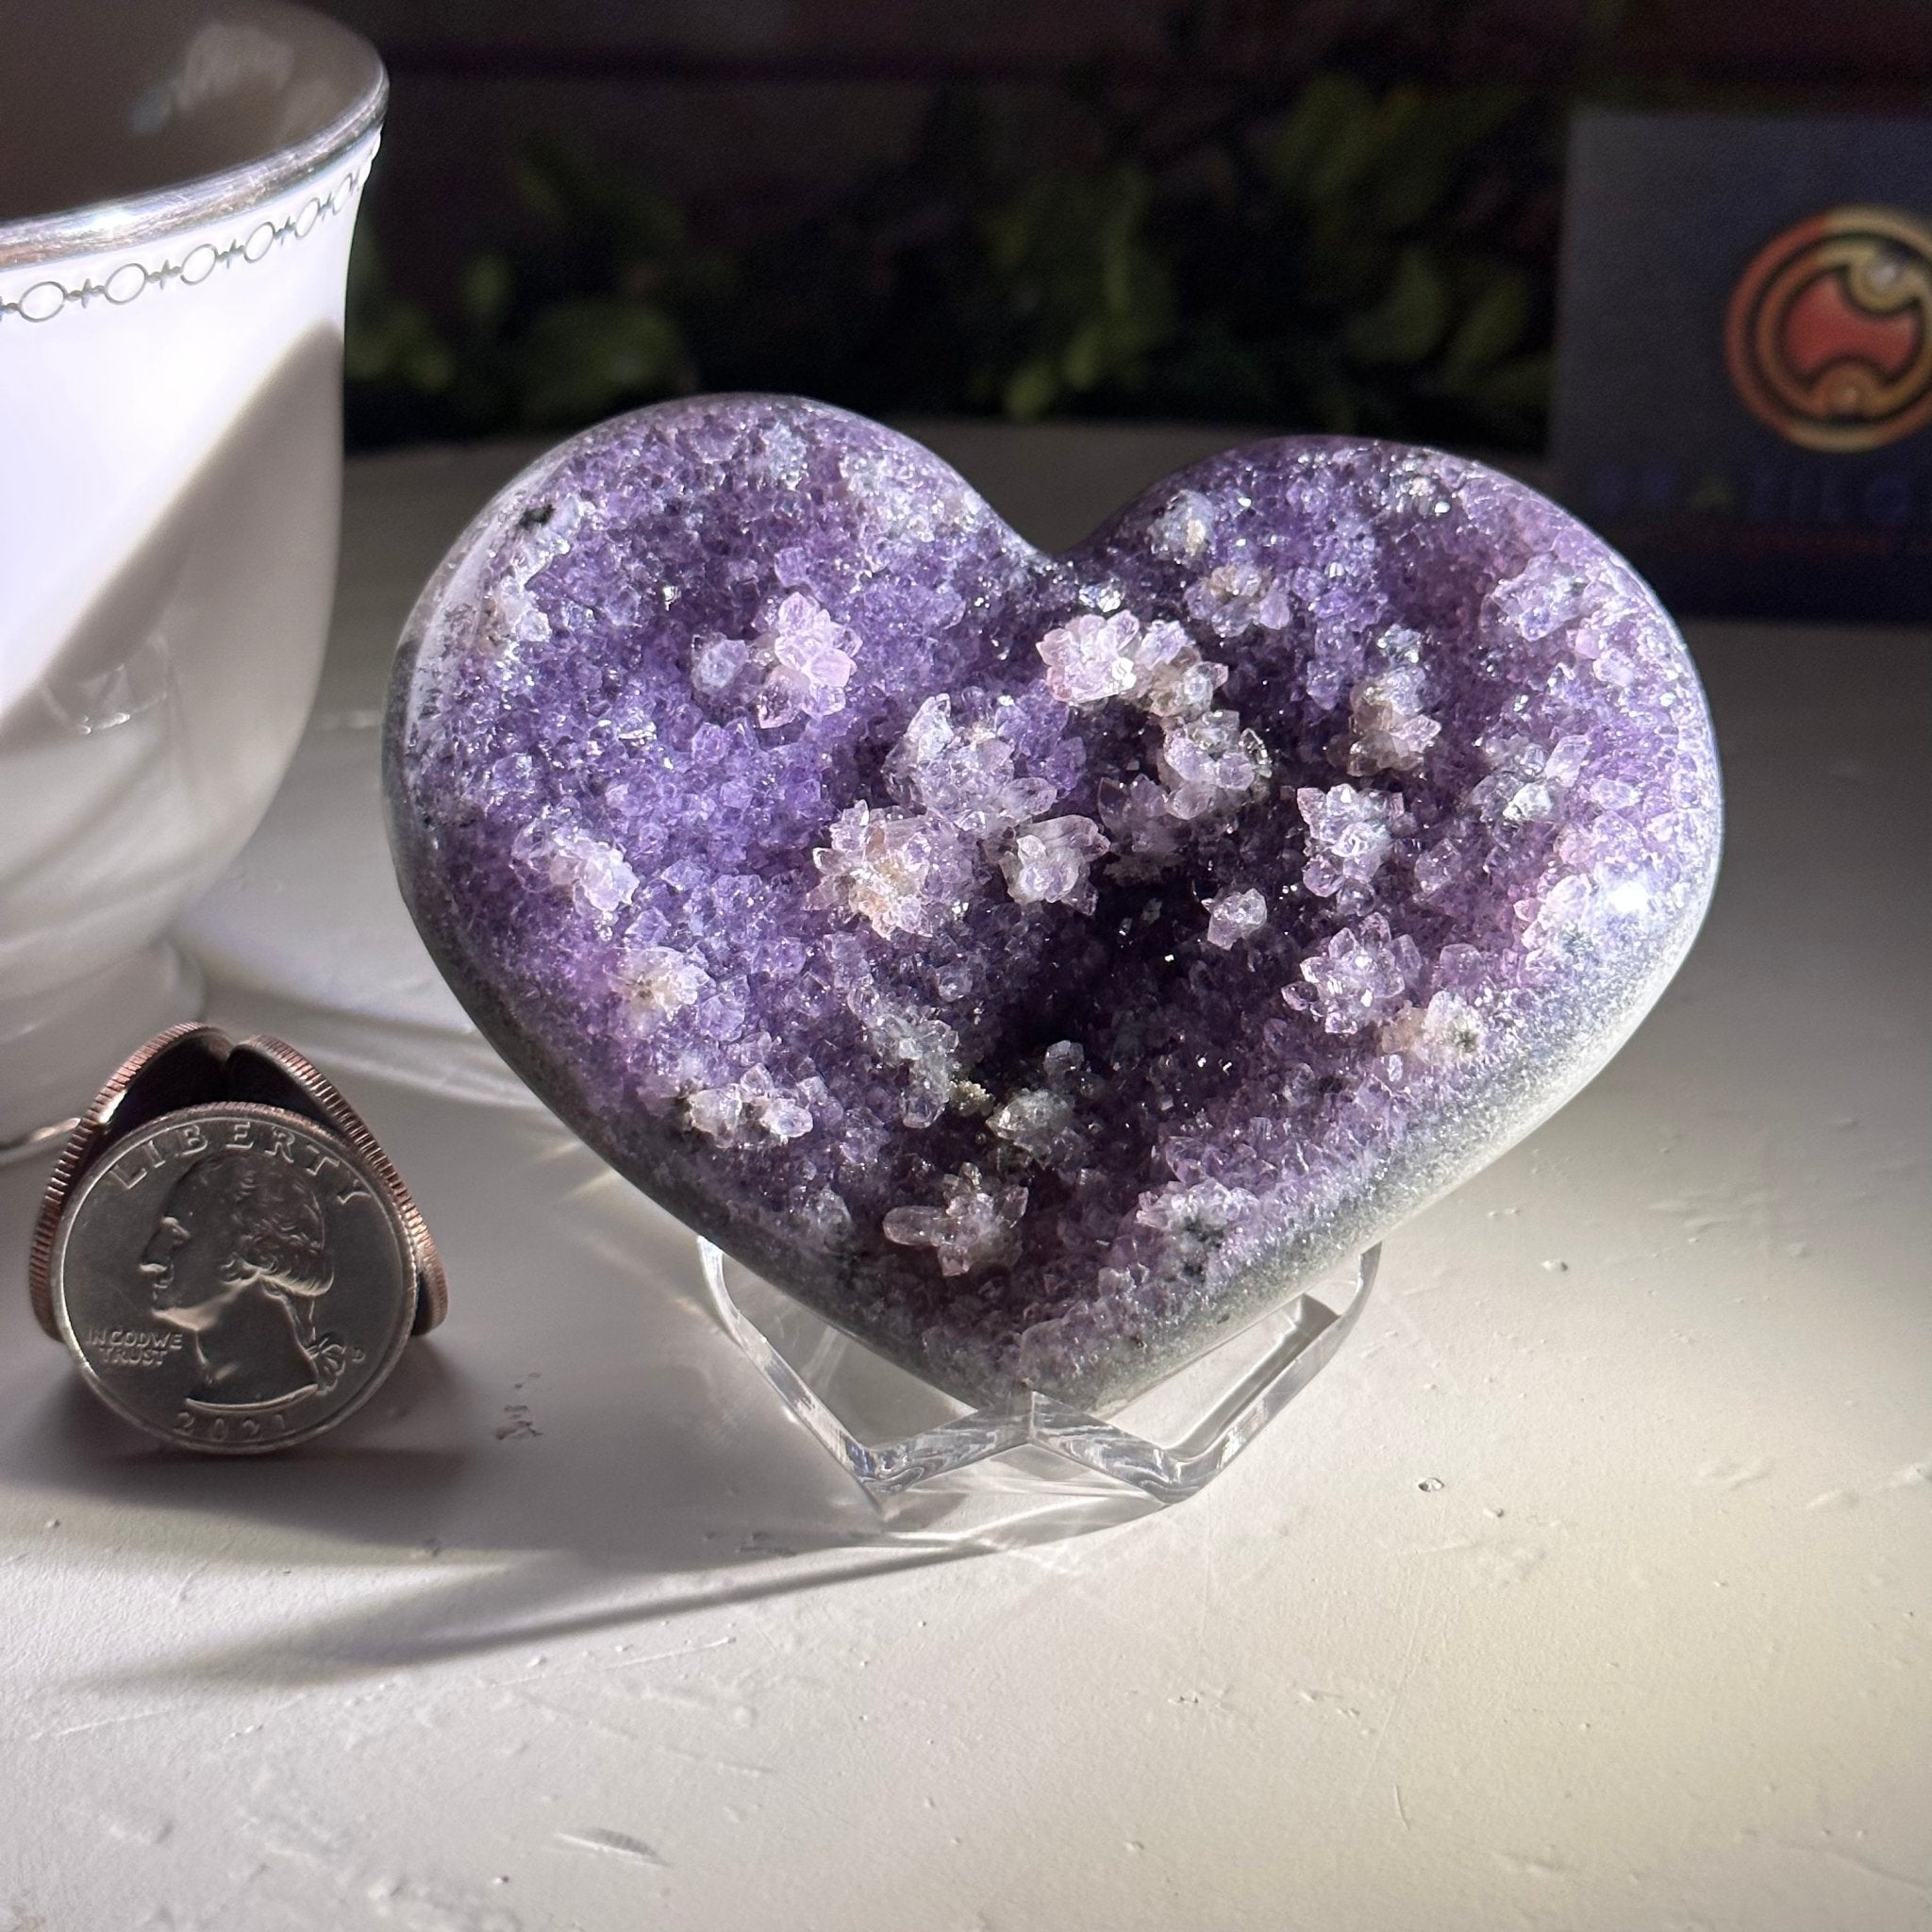 Extra Quality Amethyst Heart Geode on an Acrylic Stand, 0.43 lbs & 2.4" Tall #5462-0085 by Brazil Gems - Brazil GemsBrazil GemsExtra Quality Amethyst Heart Geode on an Acrylic Stand, 0.43 lbs & 2.4" Tall #5462-0085 by Brazil GemsHearts5462-0085